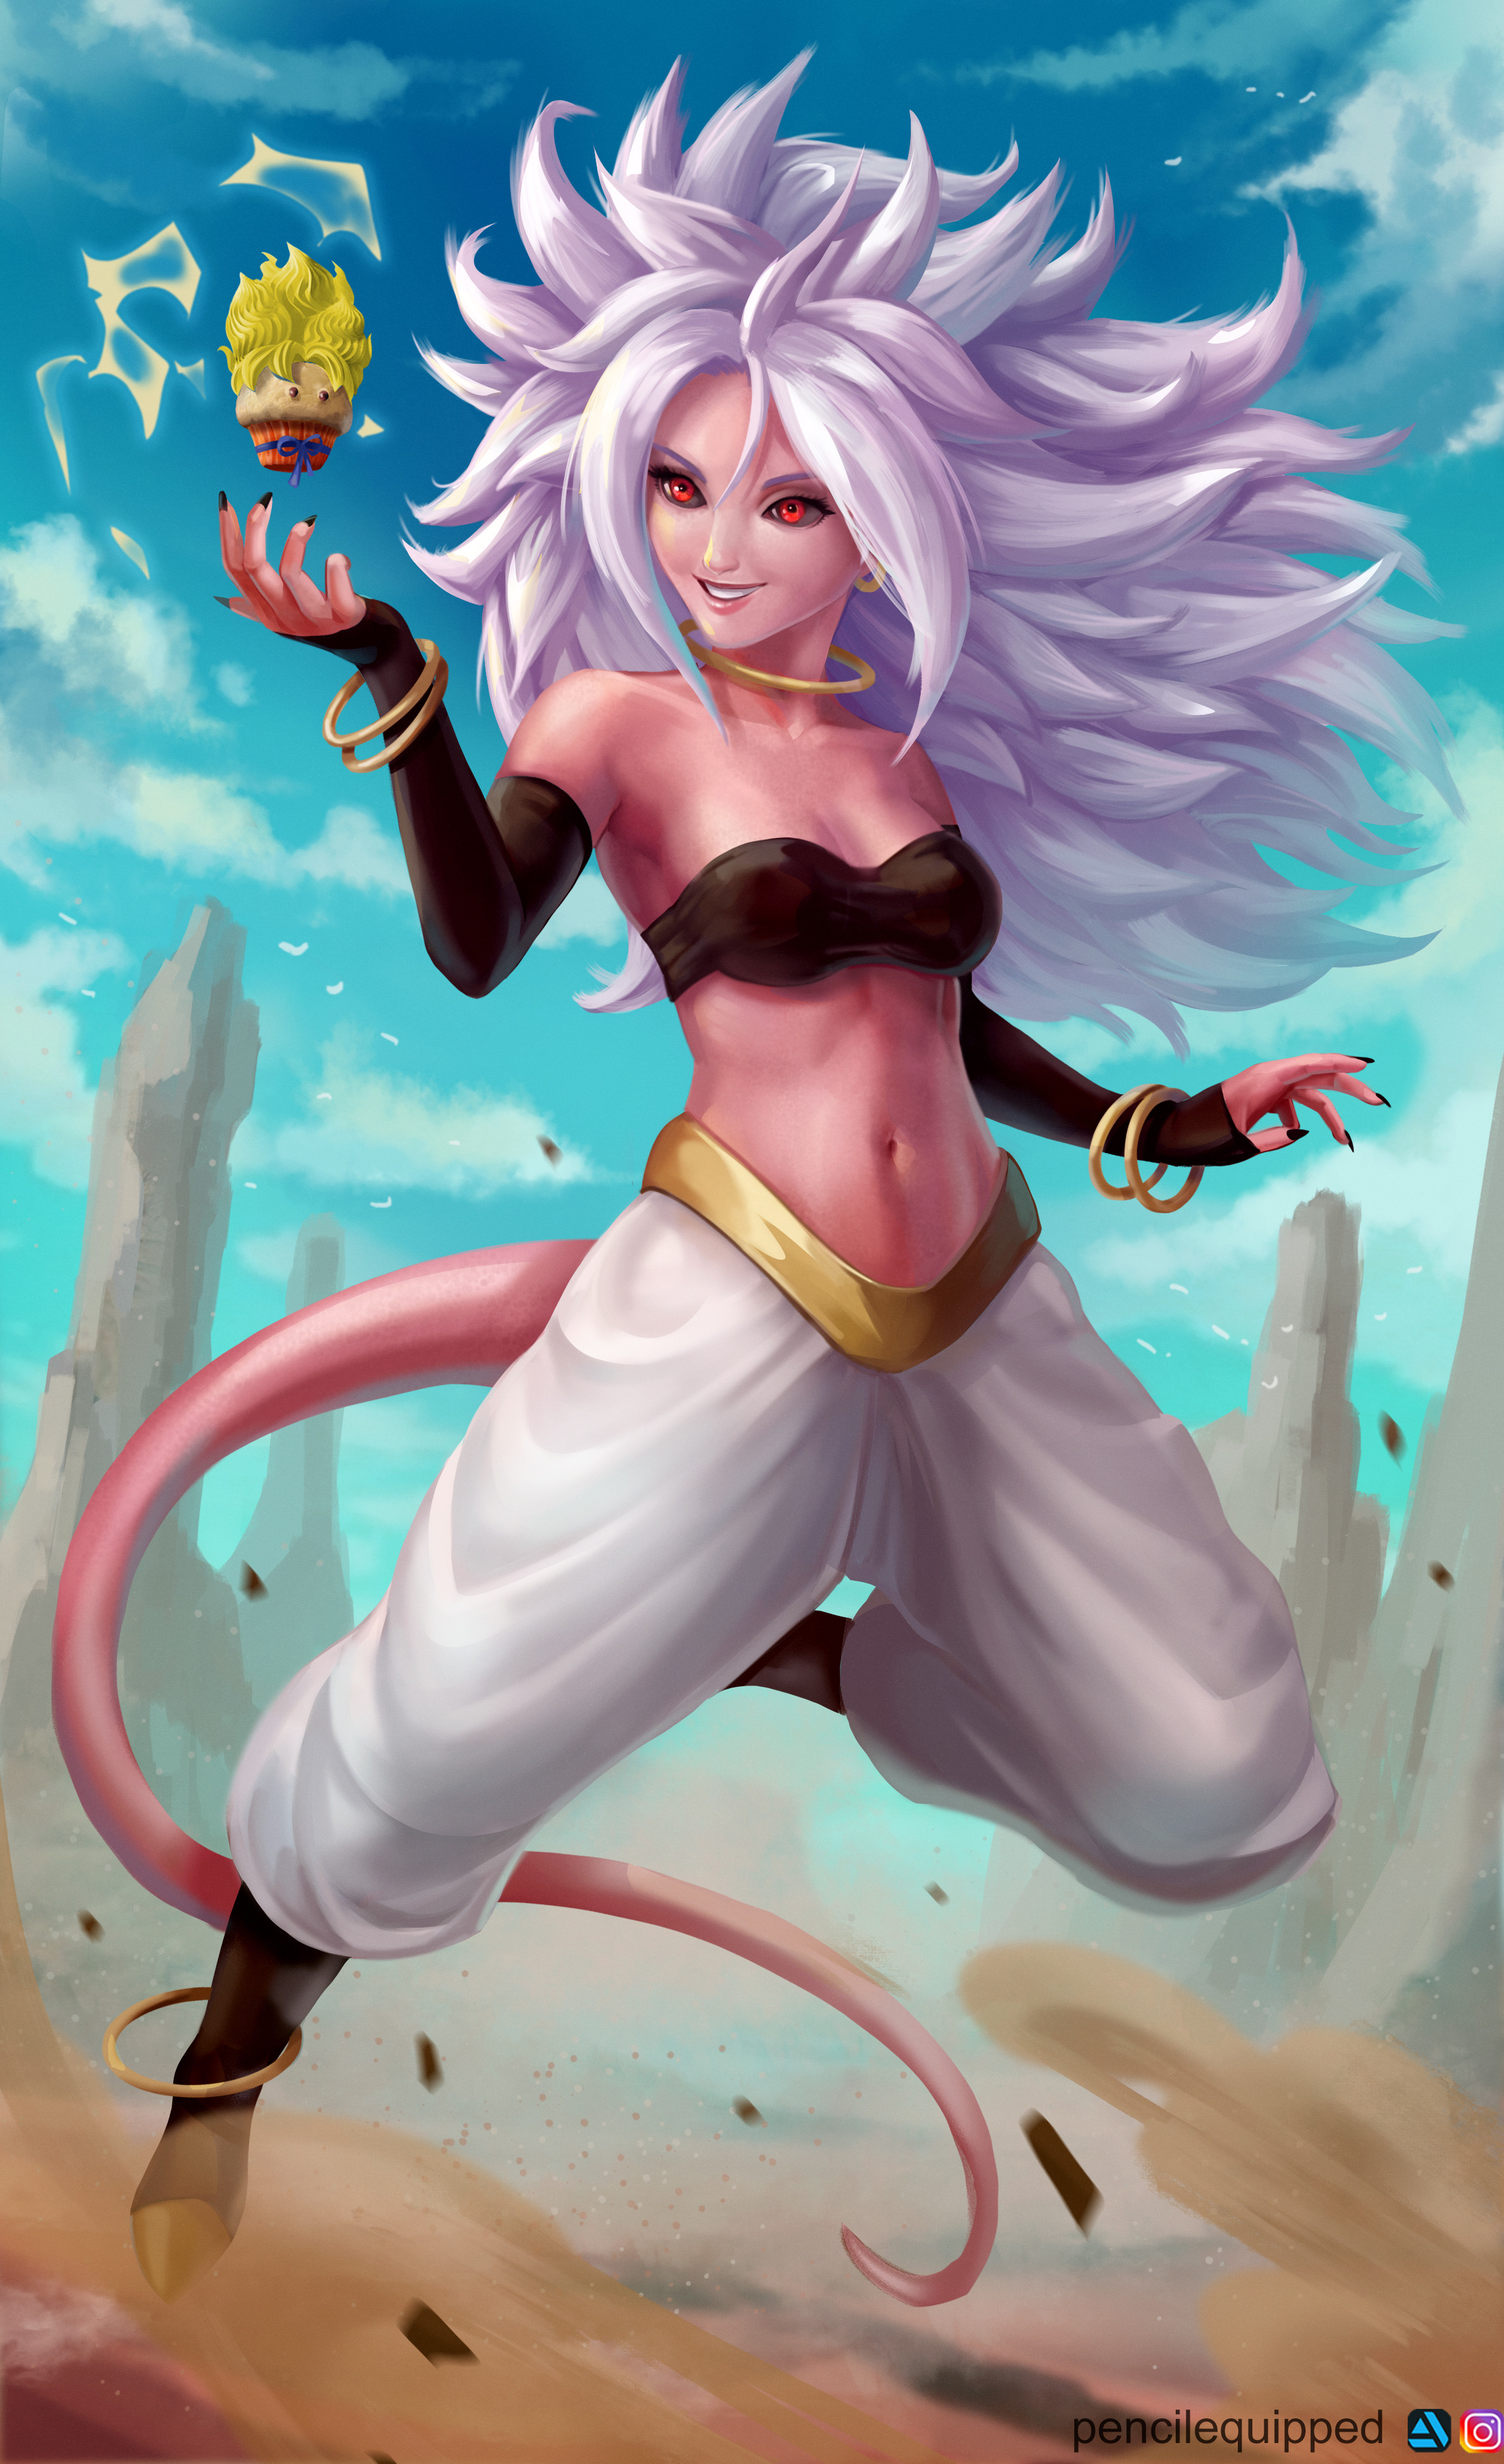 Android 21 Lab Coat DLC Character Confirmed for Dragon Ball FighterZ   DRAGON BALL OFFICIAL SITE